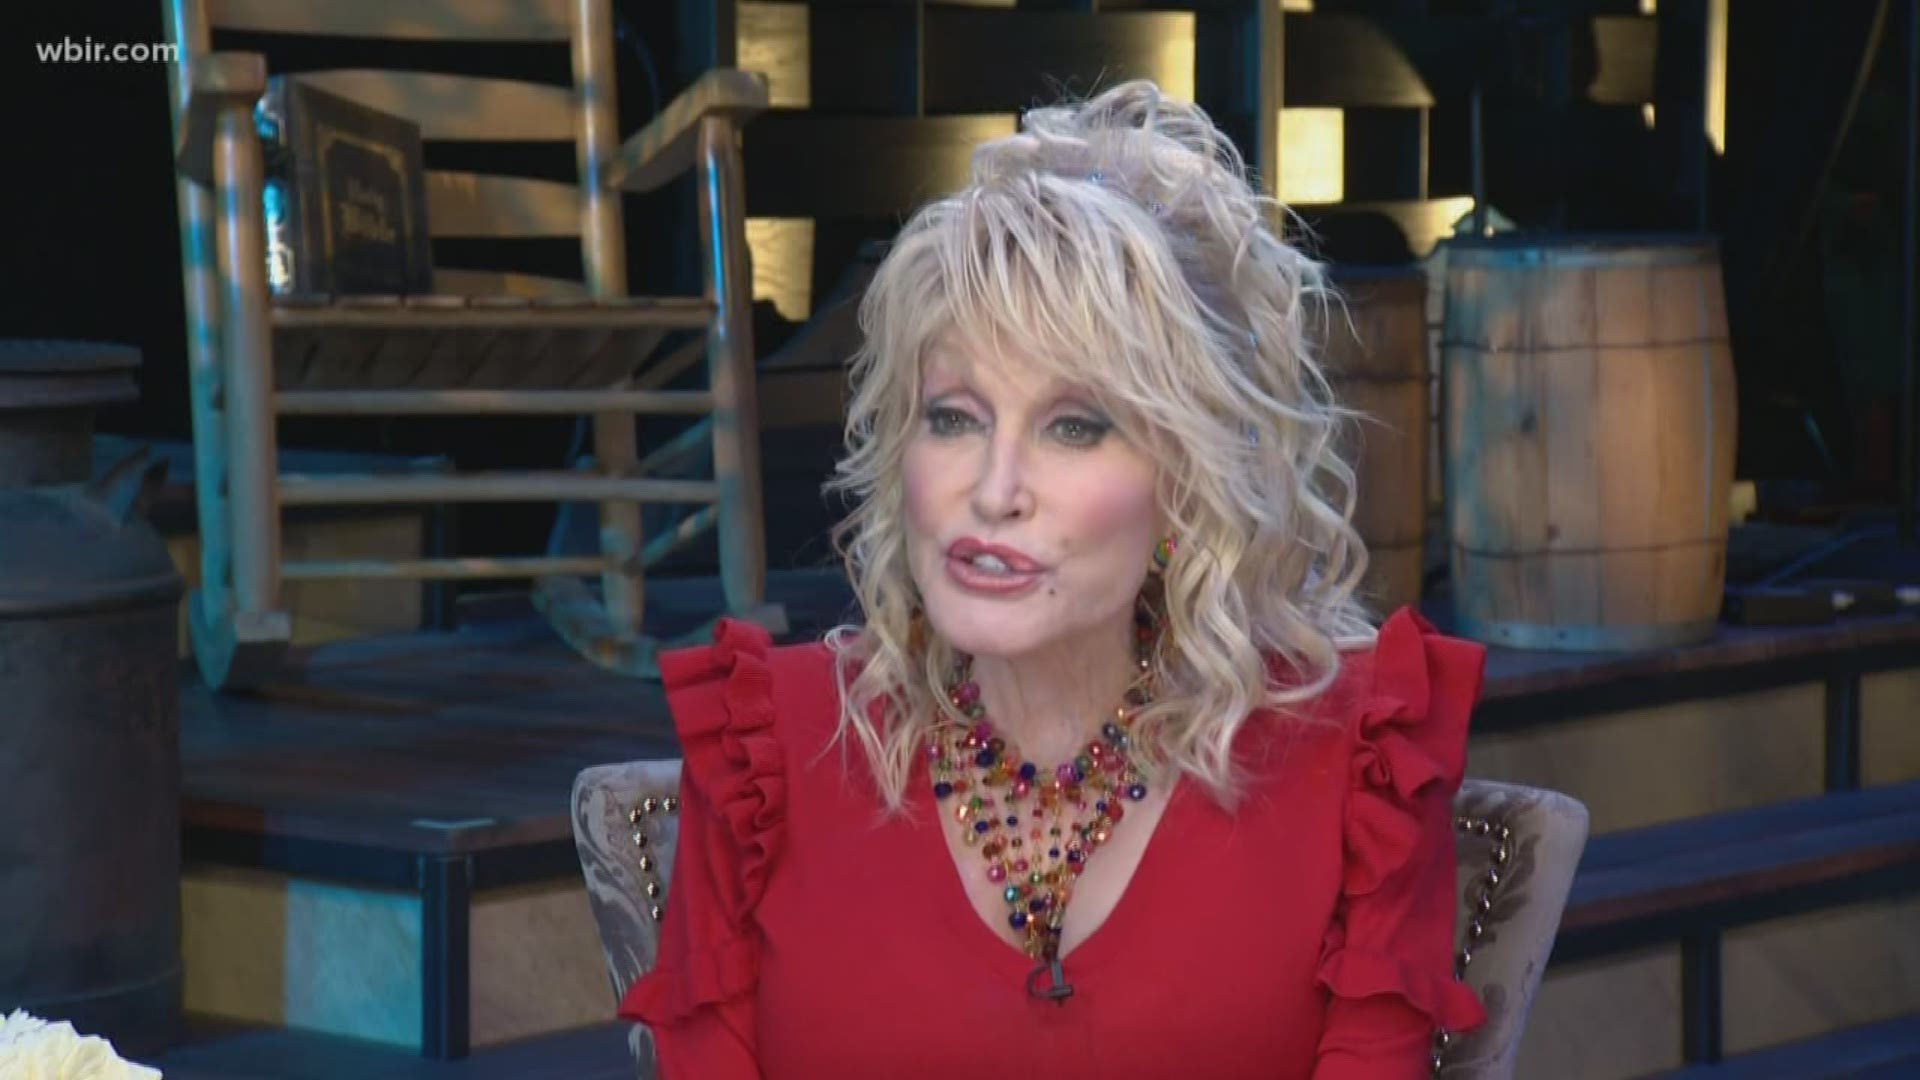 Sevier County Native Dolly Parton doesn't have time to slow down. She's busy with Dollywood, plans for a second resort, a deal with Netflix and an honor by the Grand Ole opry in the fall. Dollywood is now open for the season, visit dollywood.com. March 18, 2019-4pm